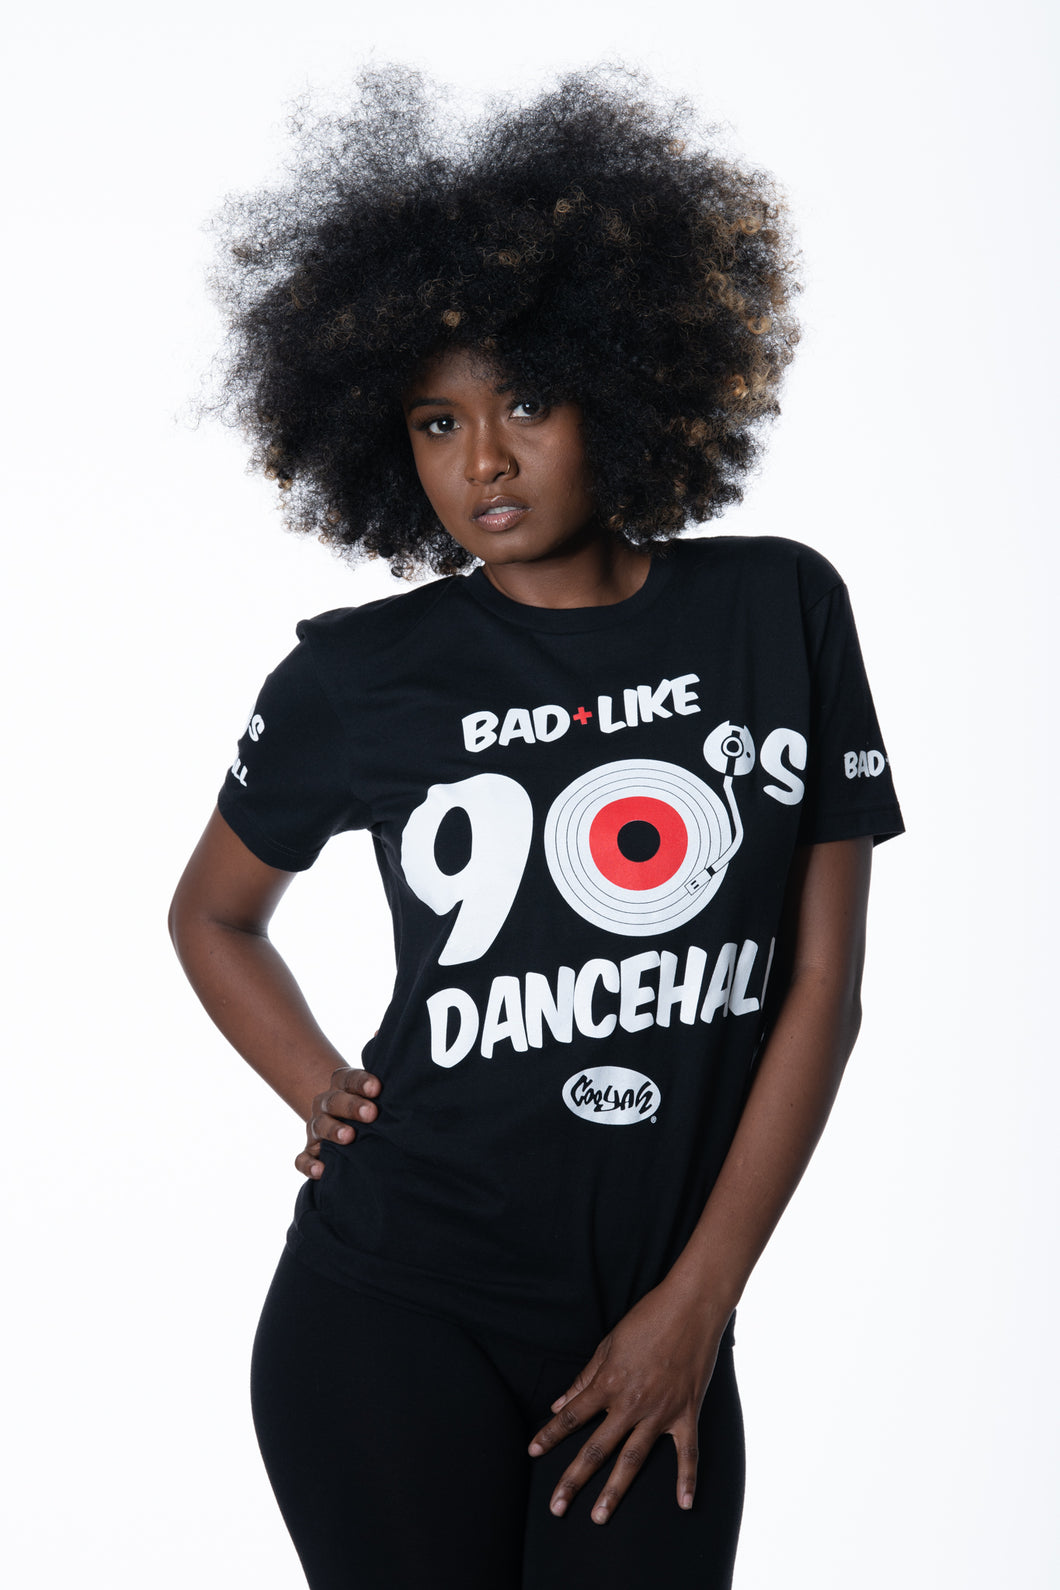 Cooyah Jamaica.  Bad Like 90's Dancehall graphic tee in black.  Soft, ringspun cotton.  Jamaican clothing brand since 1987.